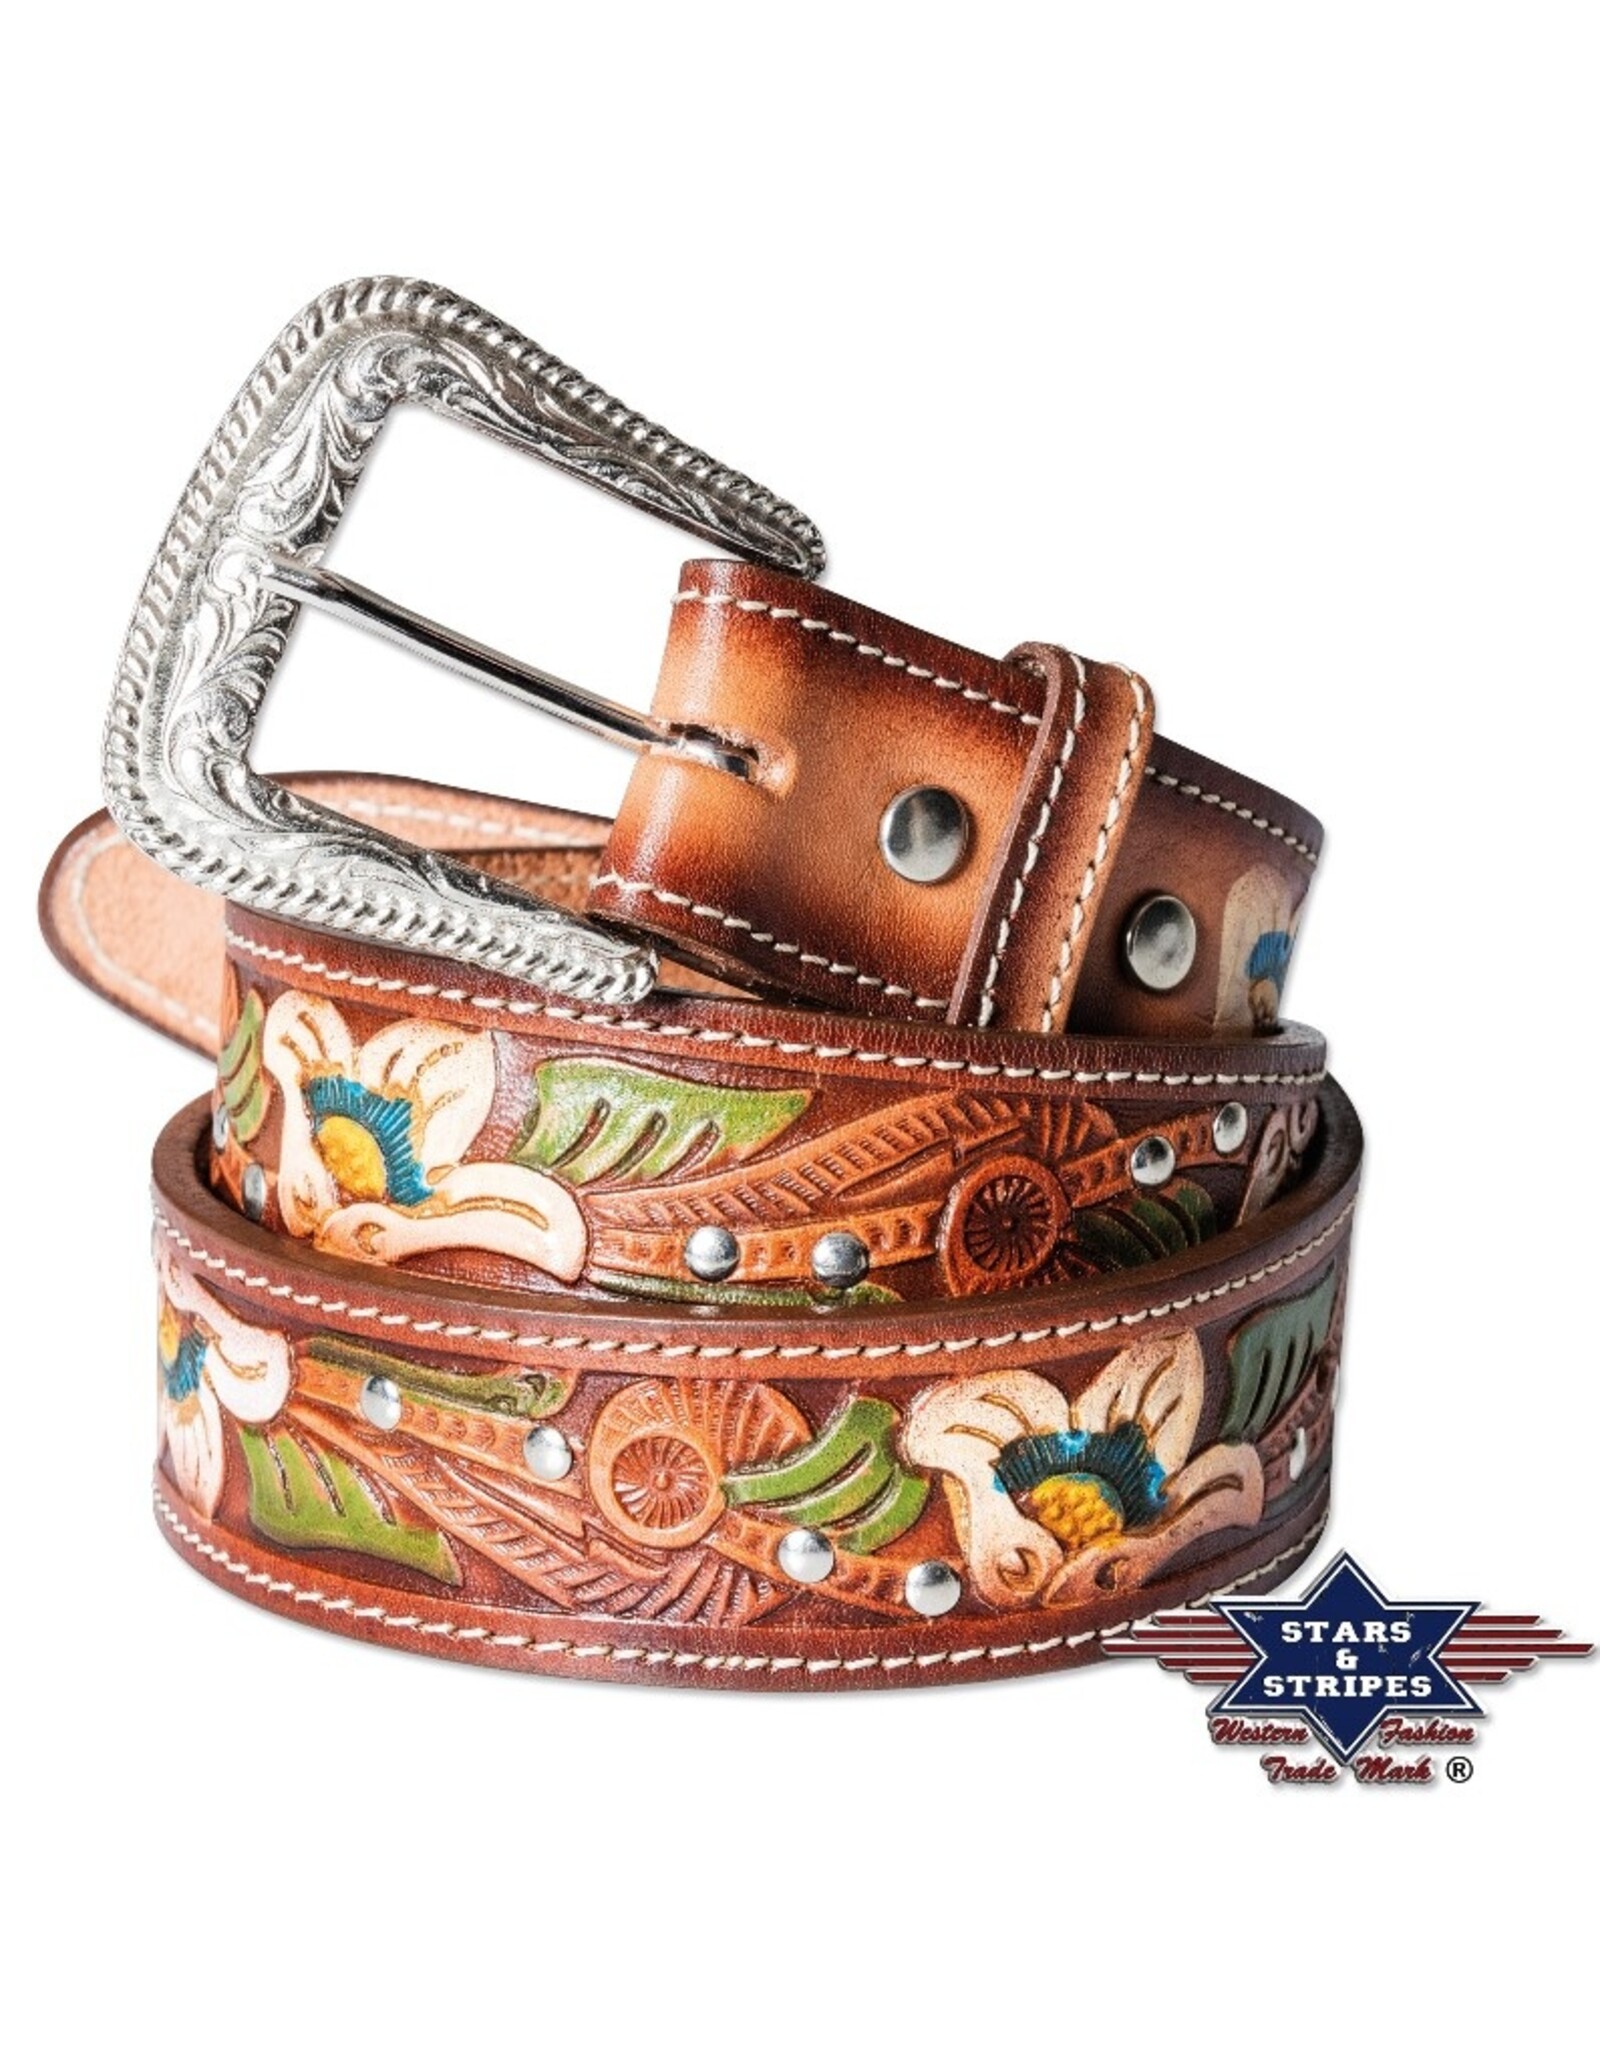 Stars&Stripes Leather belts and buckles - Western belt made of embossed leather, exchangeable buckle